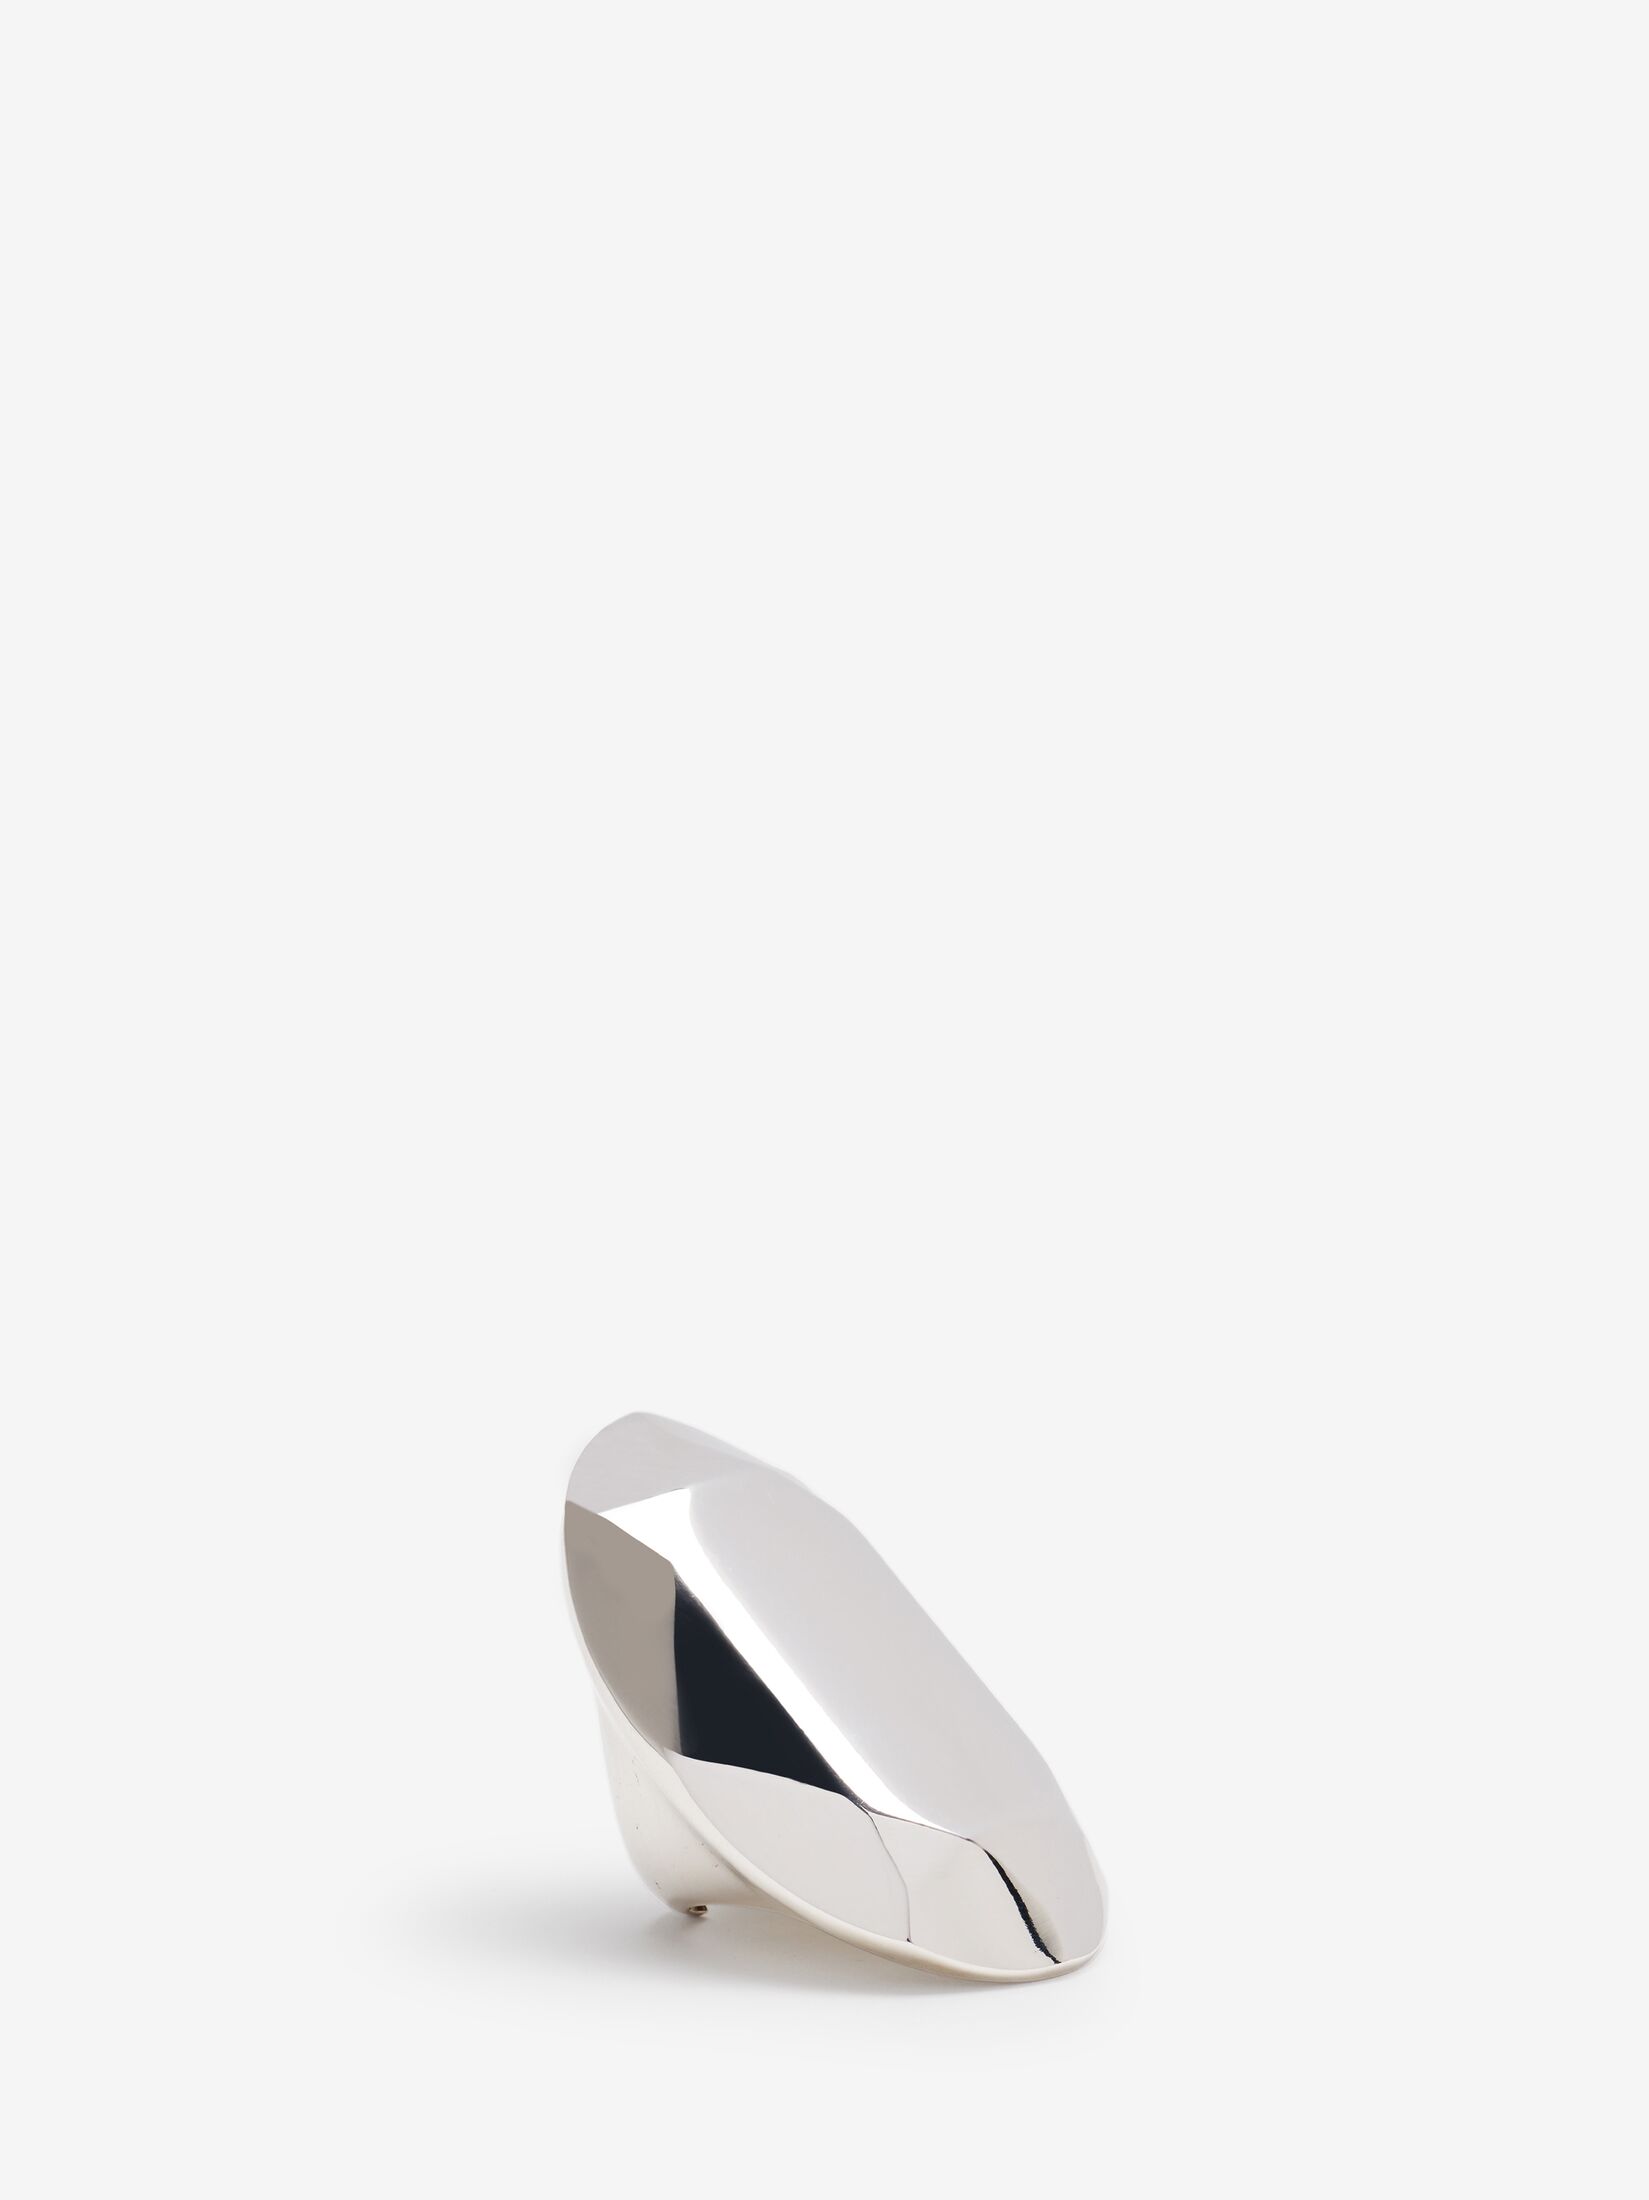 Elongated Faceted Ring